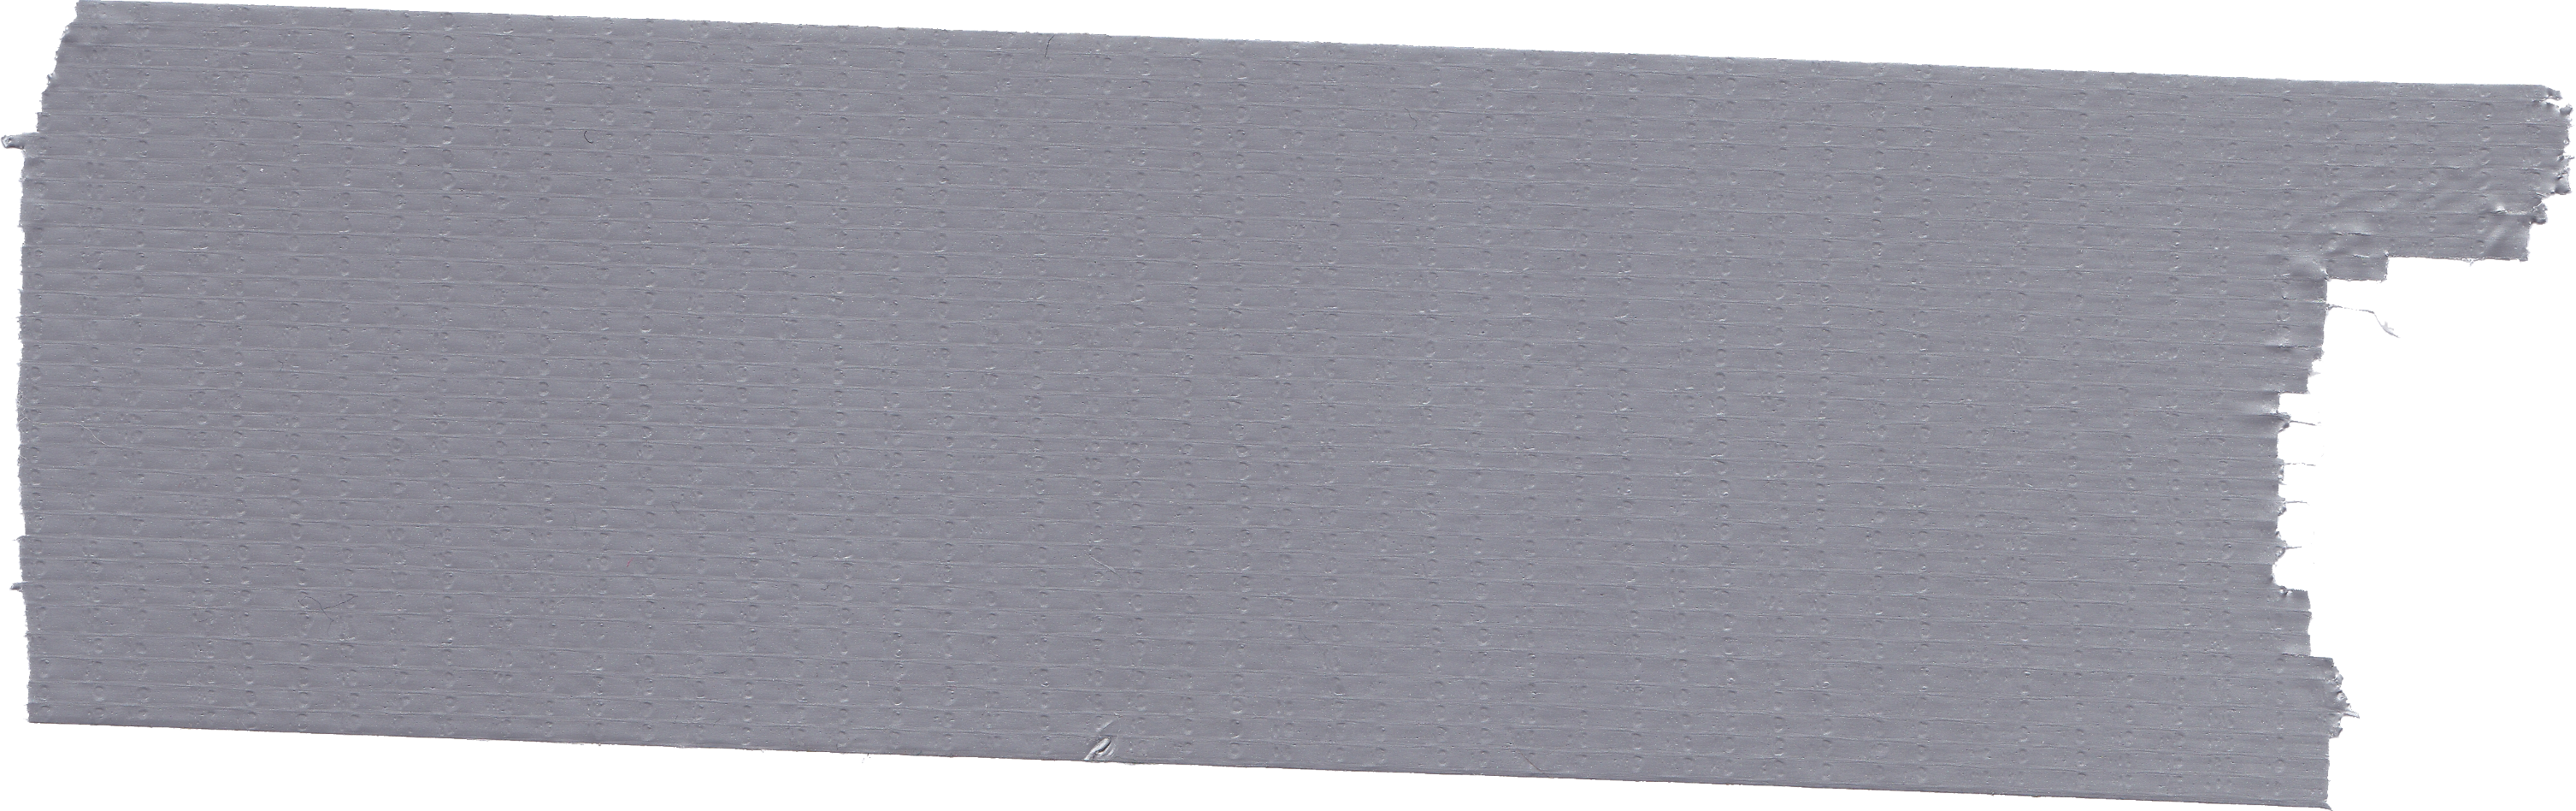 Grey Duct Tape Background PNG Image